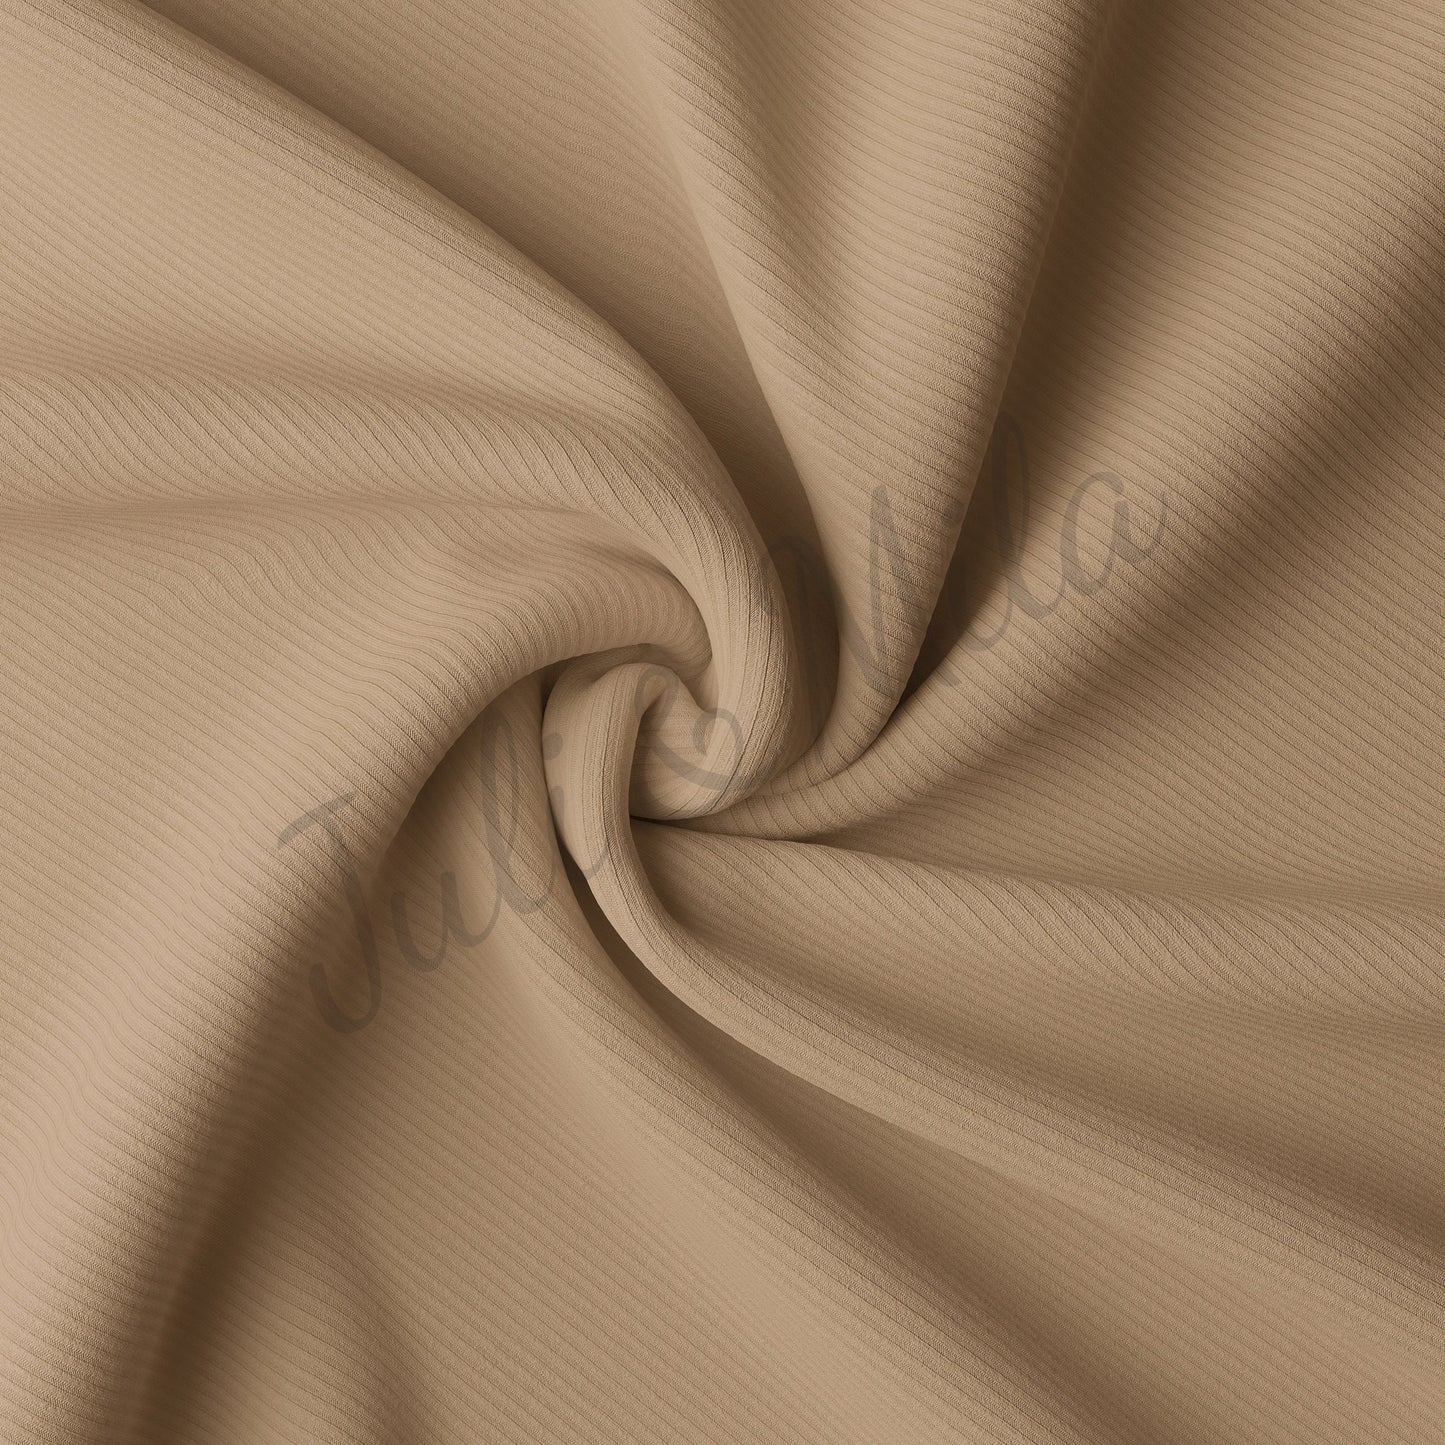 Tan Rib Knit Fabric by the Yard Ribbed Jersey Stretchy Soft Polyester Stretch Fabric 1 Yard